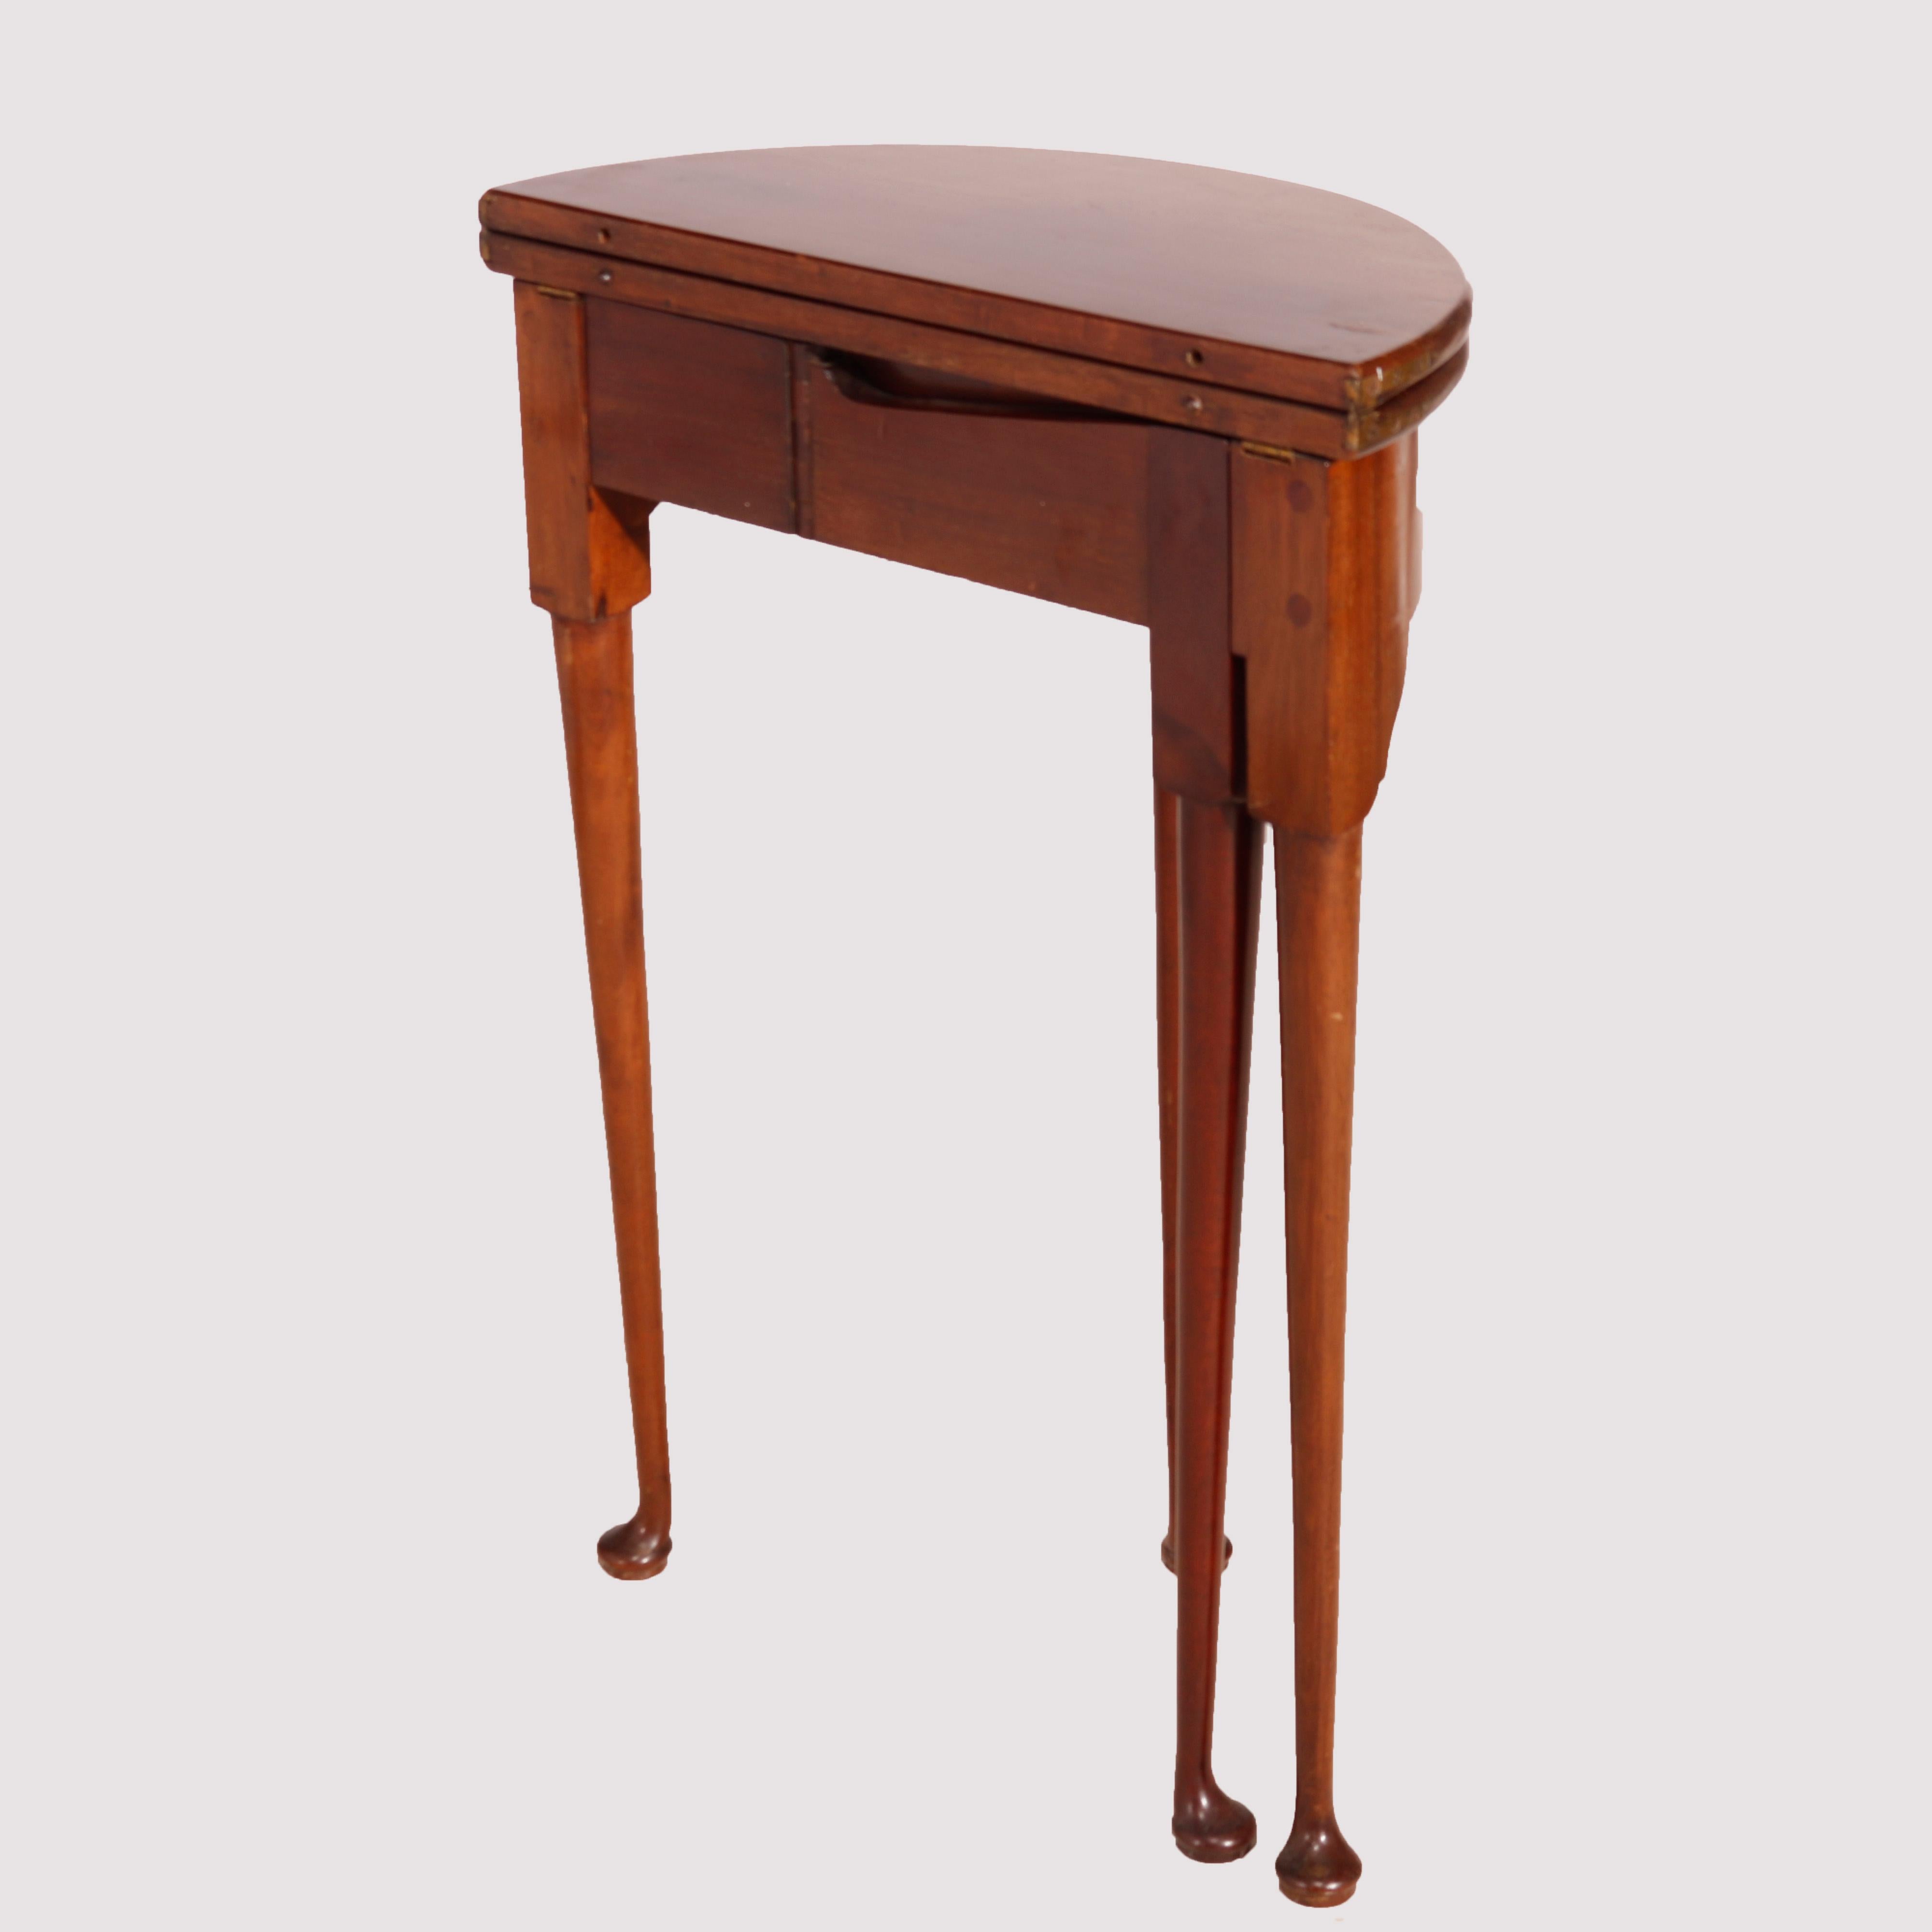 English Queen Anne Mahogany Demilune Lift Top Table, 20th Century For Sale 2